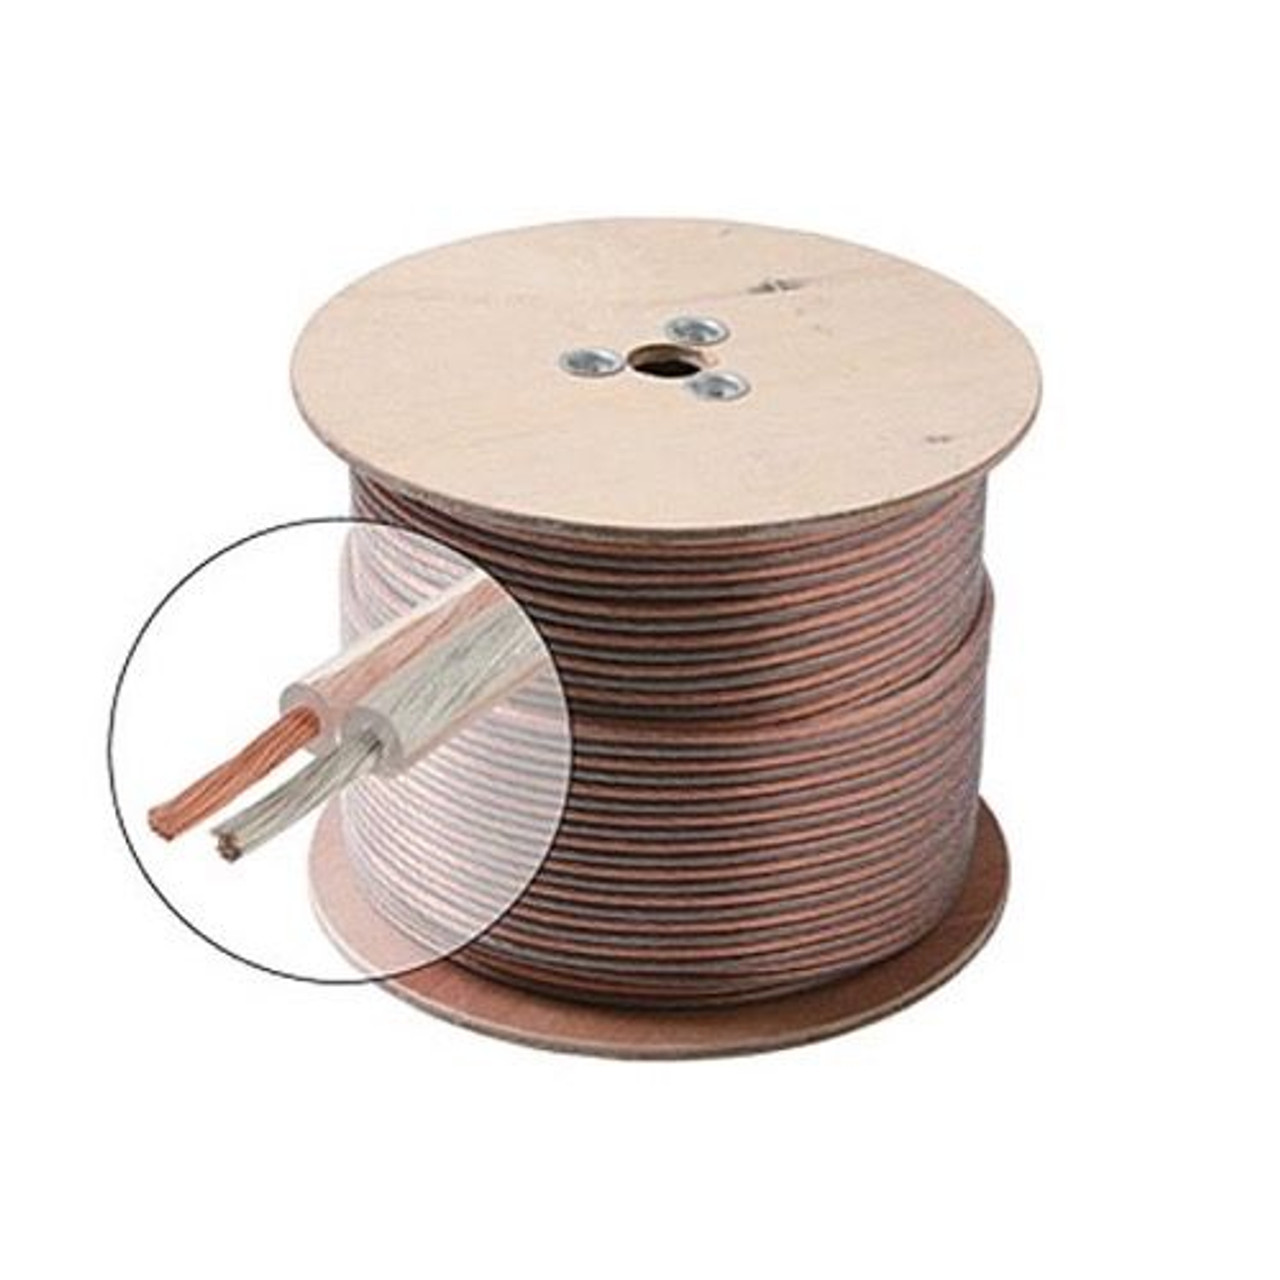 Eagle 500' FT Speaker Cable 18 AWG GA 2 Conductor Clear Oxygen Free Copper Jacket Spool Ultra Flexible Python 18-2 Jacket Audio Speaker Cable Stranded Polarized 2-Wire Speaker Cable